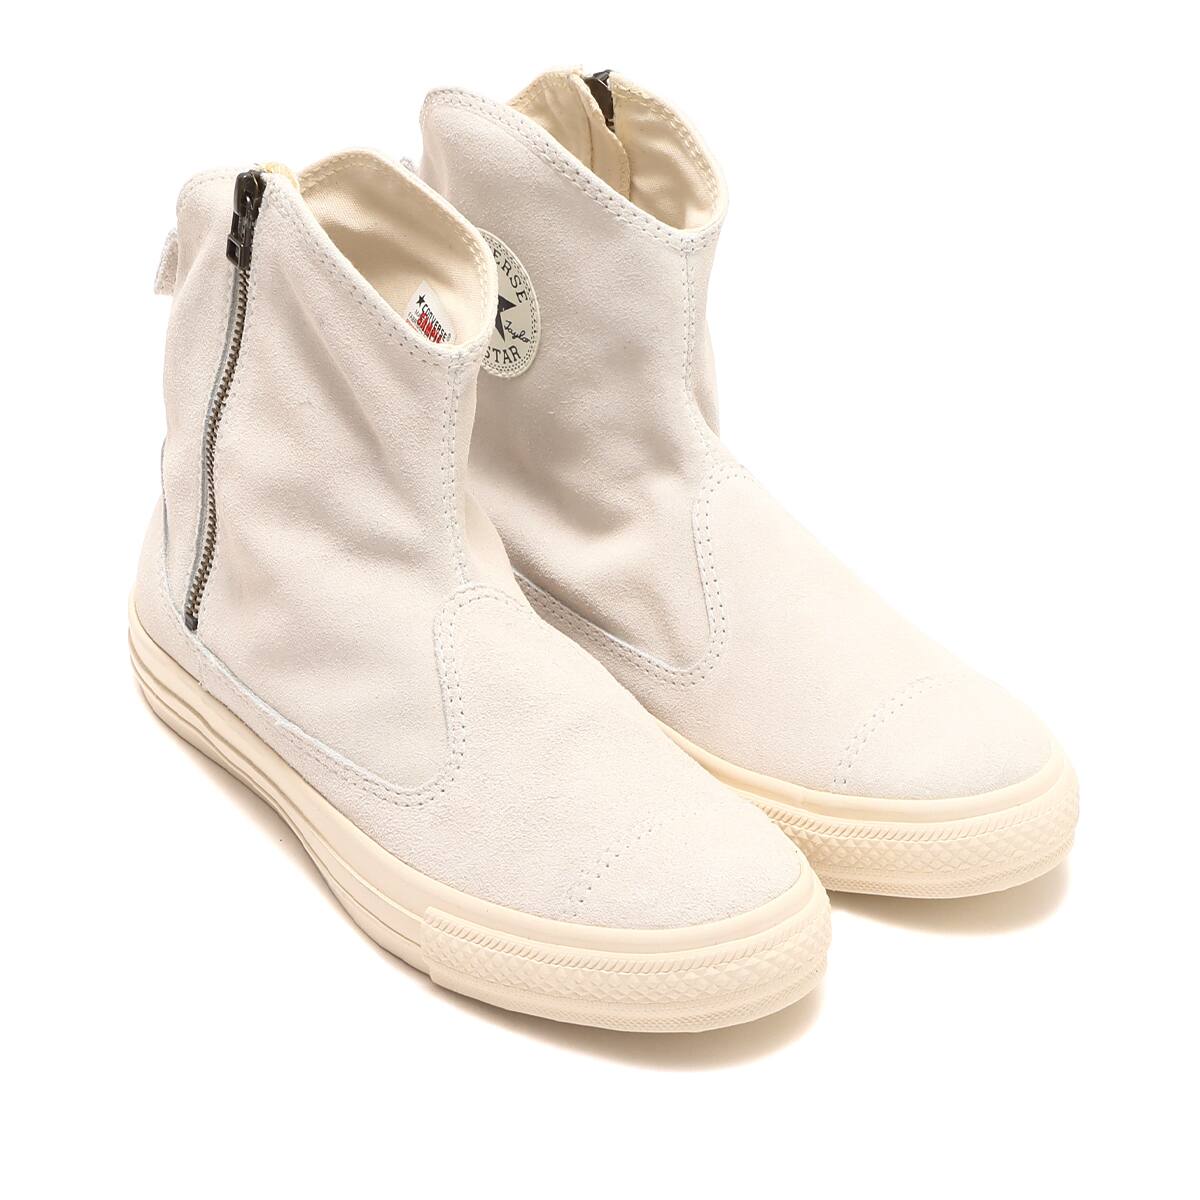 CONVERSE SUEDE AS WESTERNBOOTS II Z HI WHITE 22FW-I_photo_large